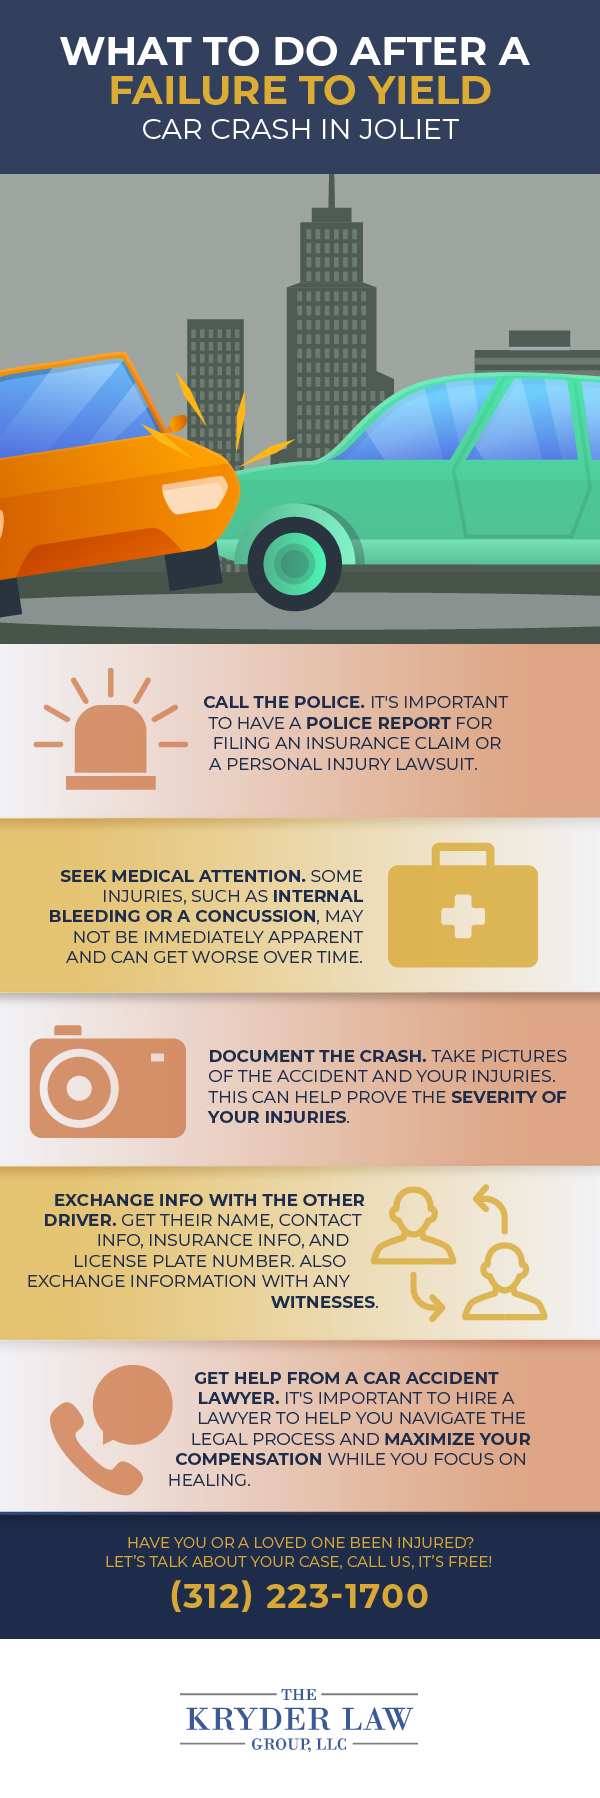 What to Do After a Failure to Yield Car Crash in Joliet Infographic